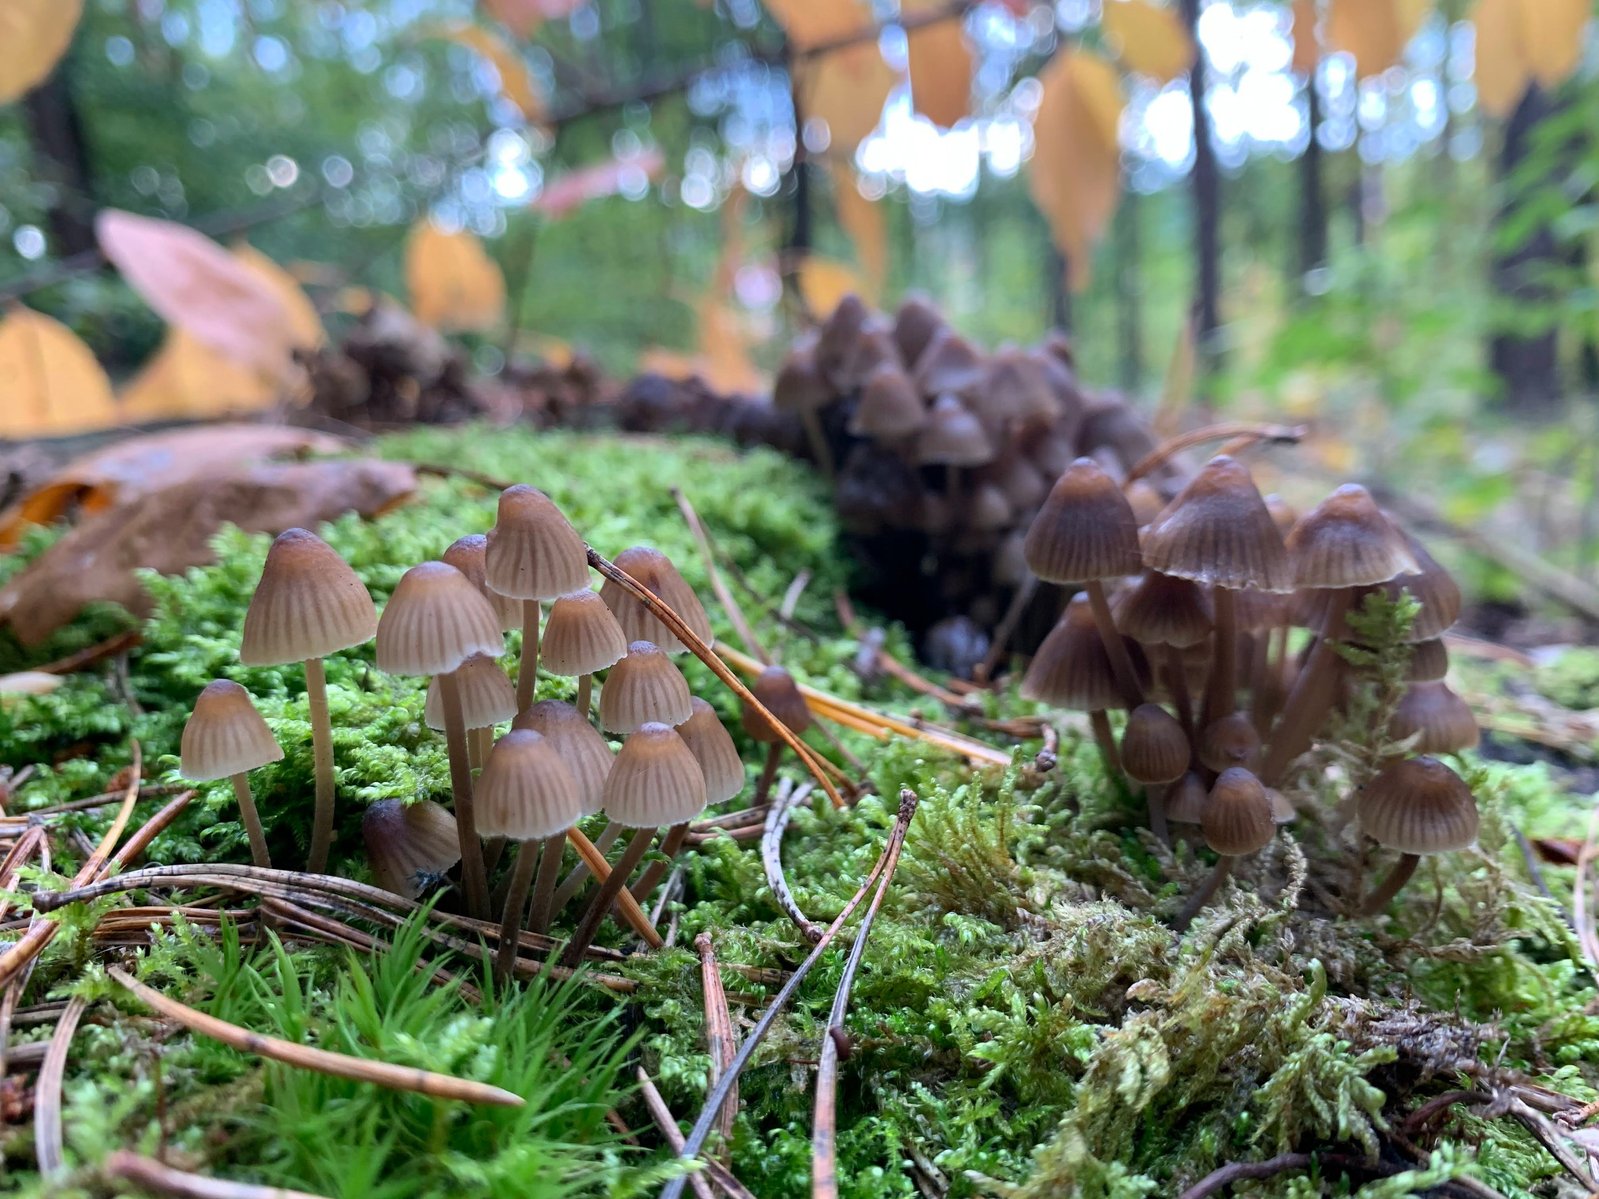 Small clusters of brown mushrooms emerging from a bed of lush green moss, creating a charming display of natural beauty.